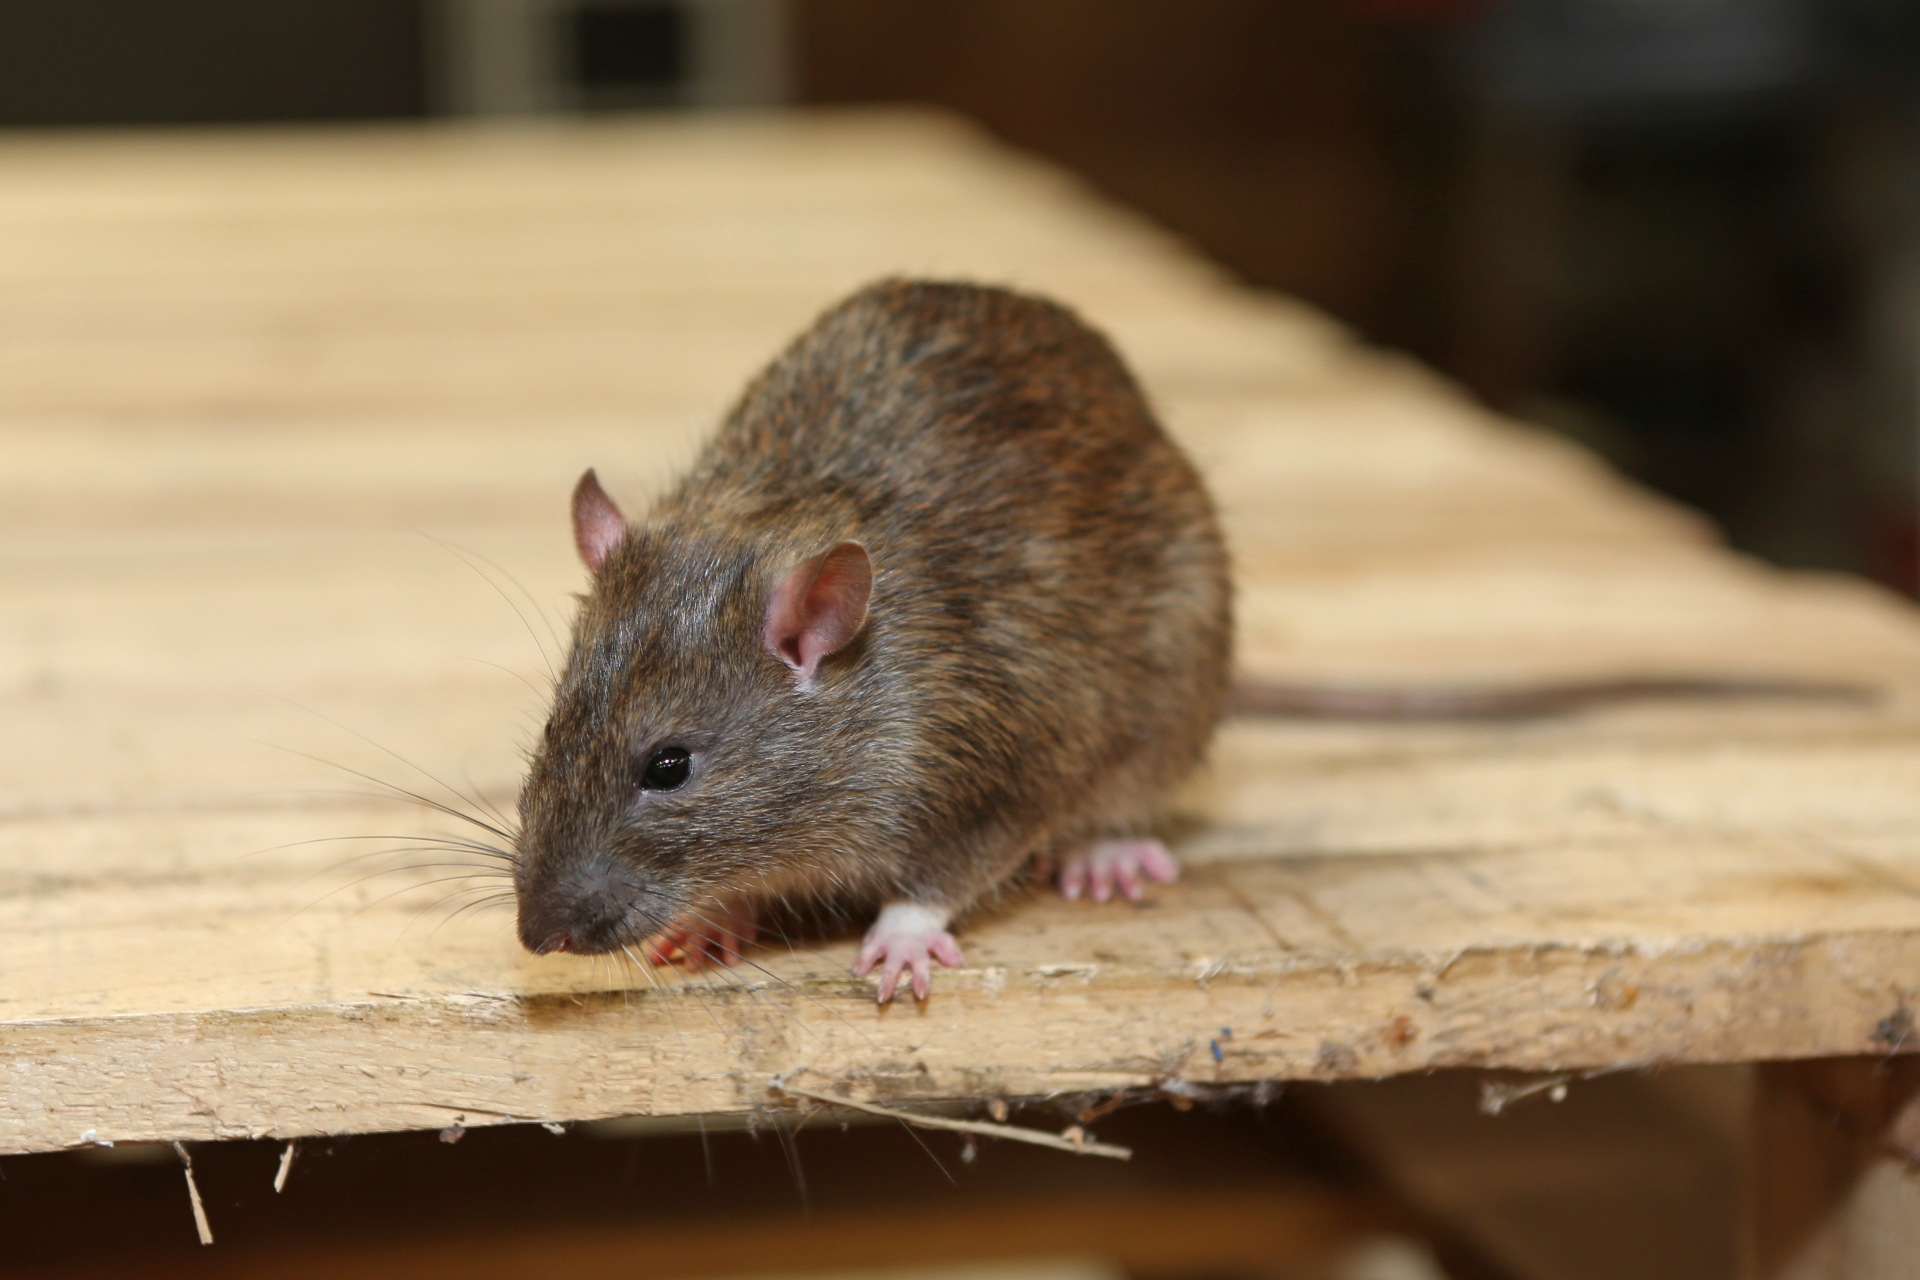 Rat Control, Pest Control in Radlett, Shenley, WD7. Call Now 020 8166 9746